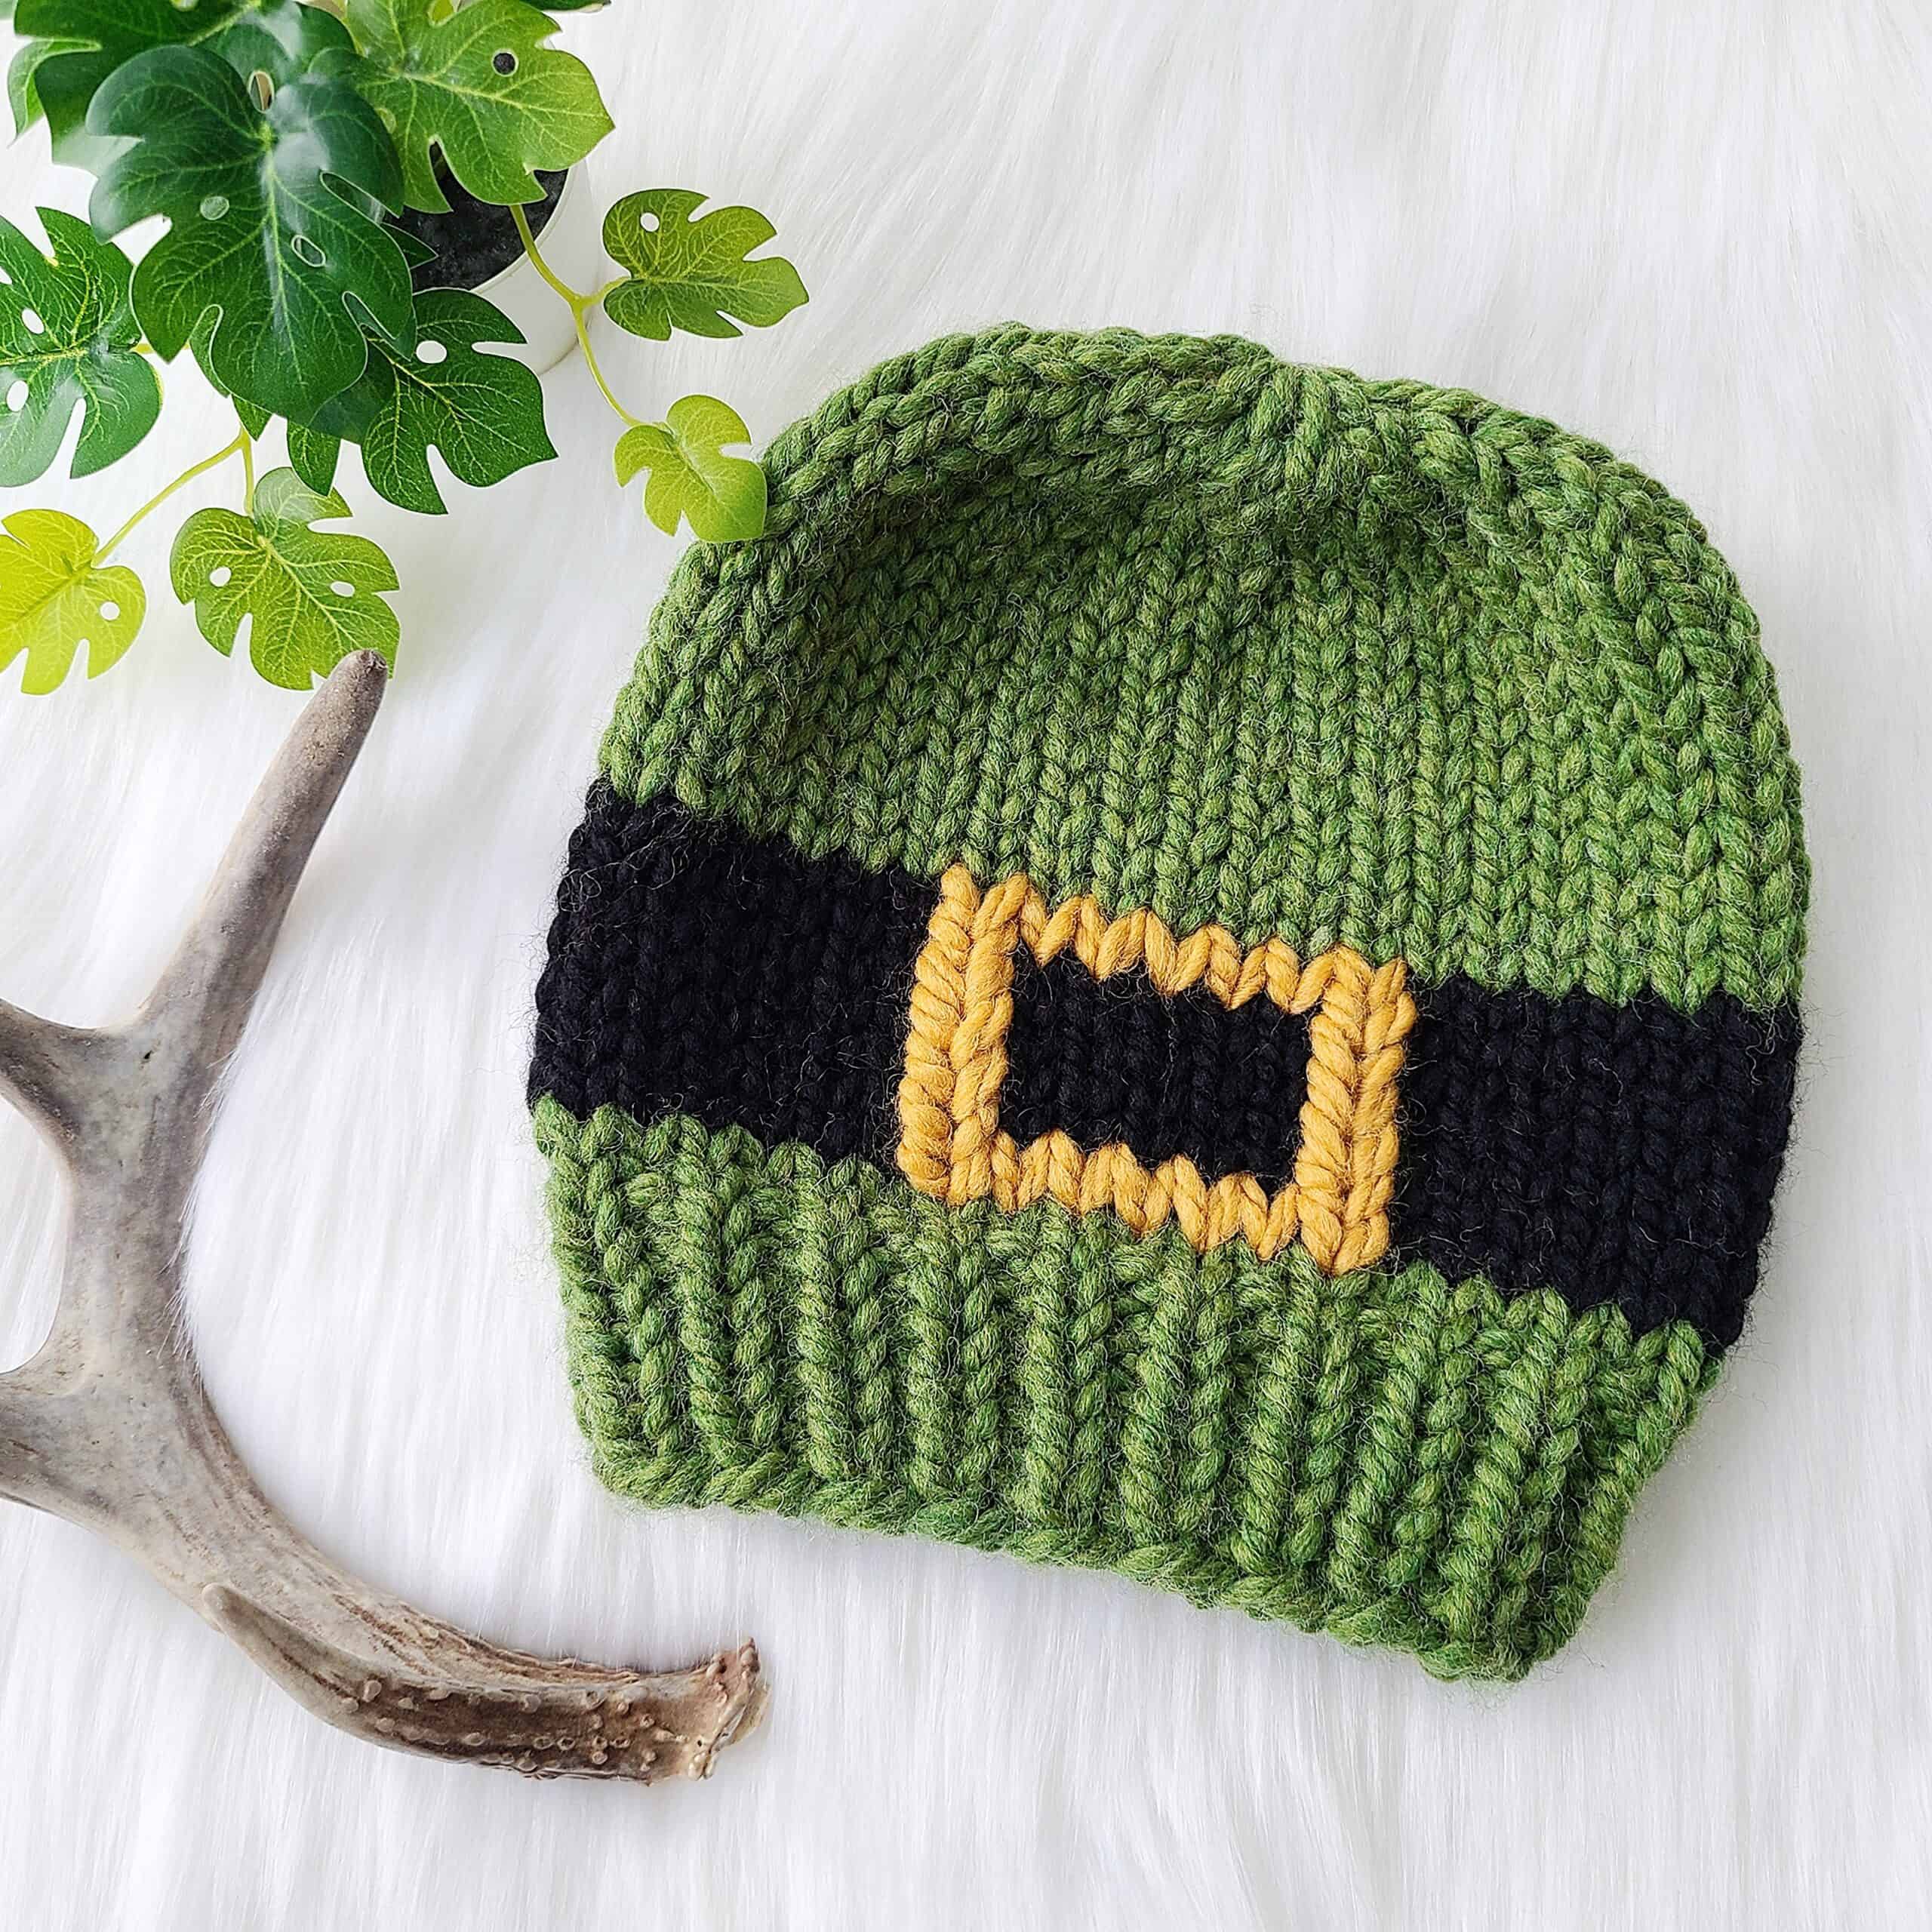 Super Bulky Crochet Hat Pattern (free in nine sizes) - Crafting Each Day